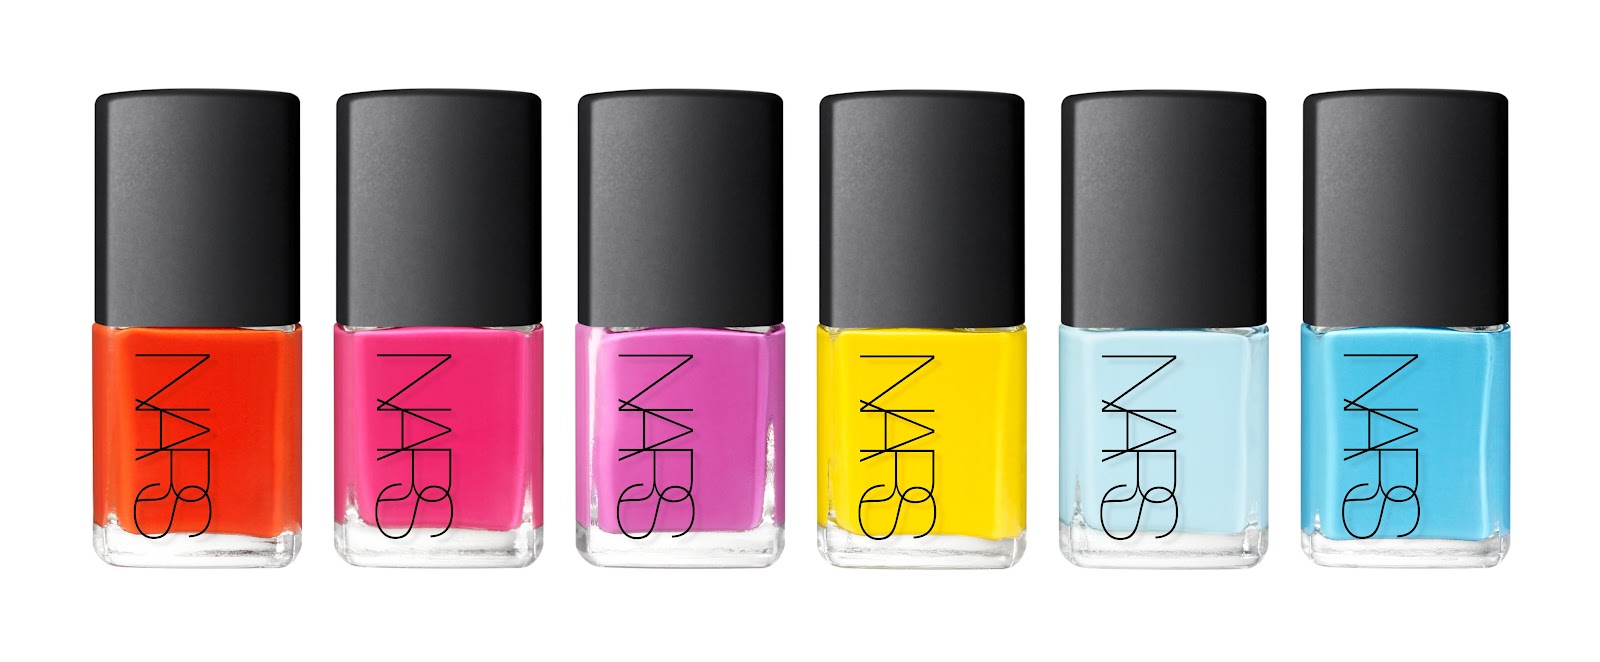 NARS Iconic Color Nail Polish in Hunger - wide 3